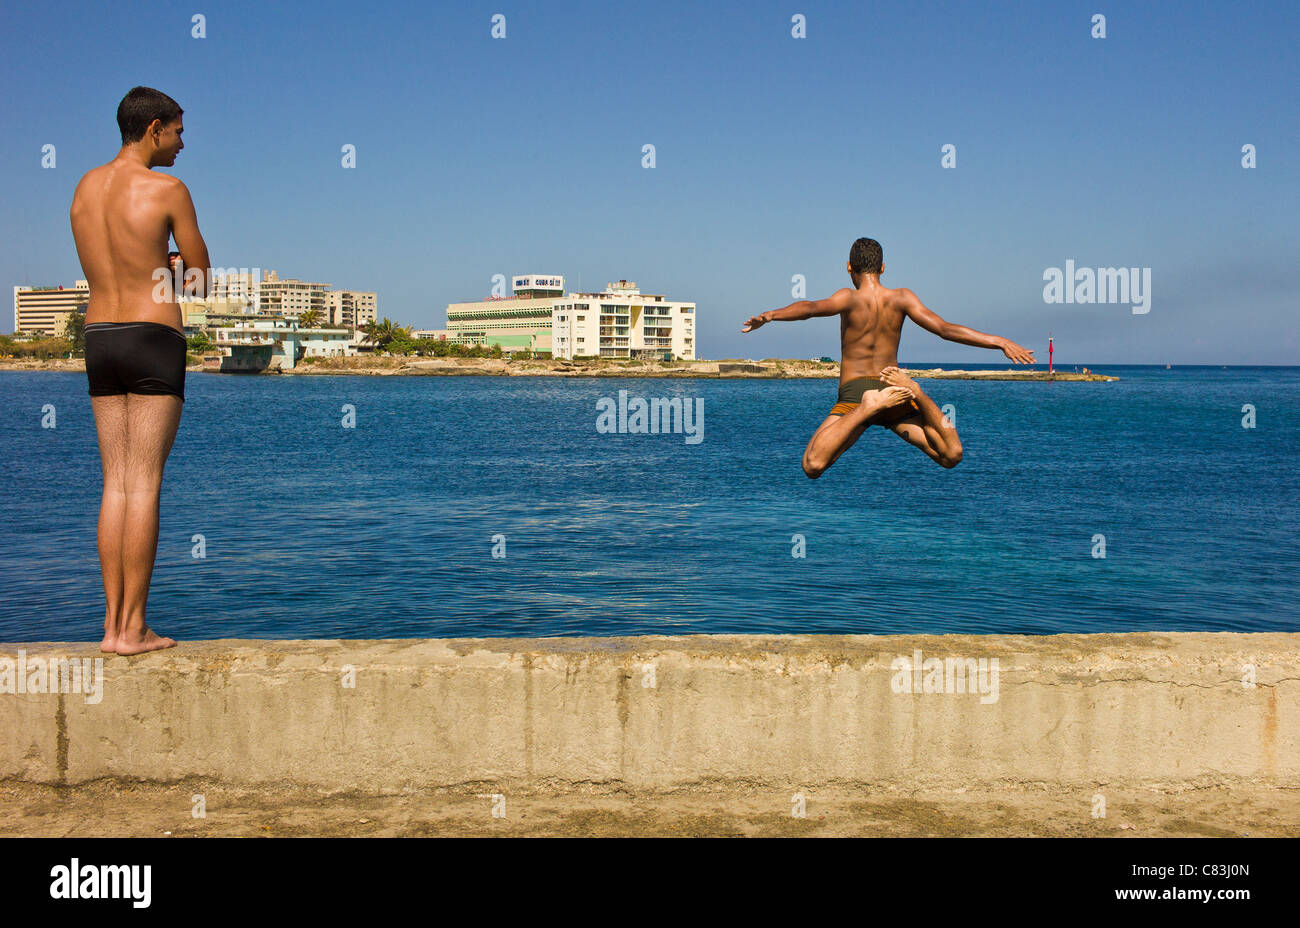 To escape the everpresent heat, two teenage boys are jumping into Bahia de la Habana on a sunny day along the Malecon in Havana. Stock Photo